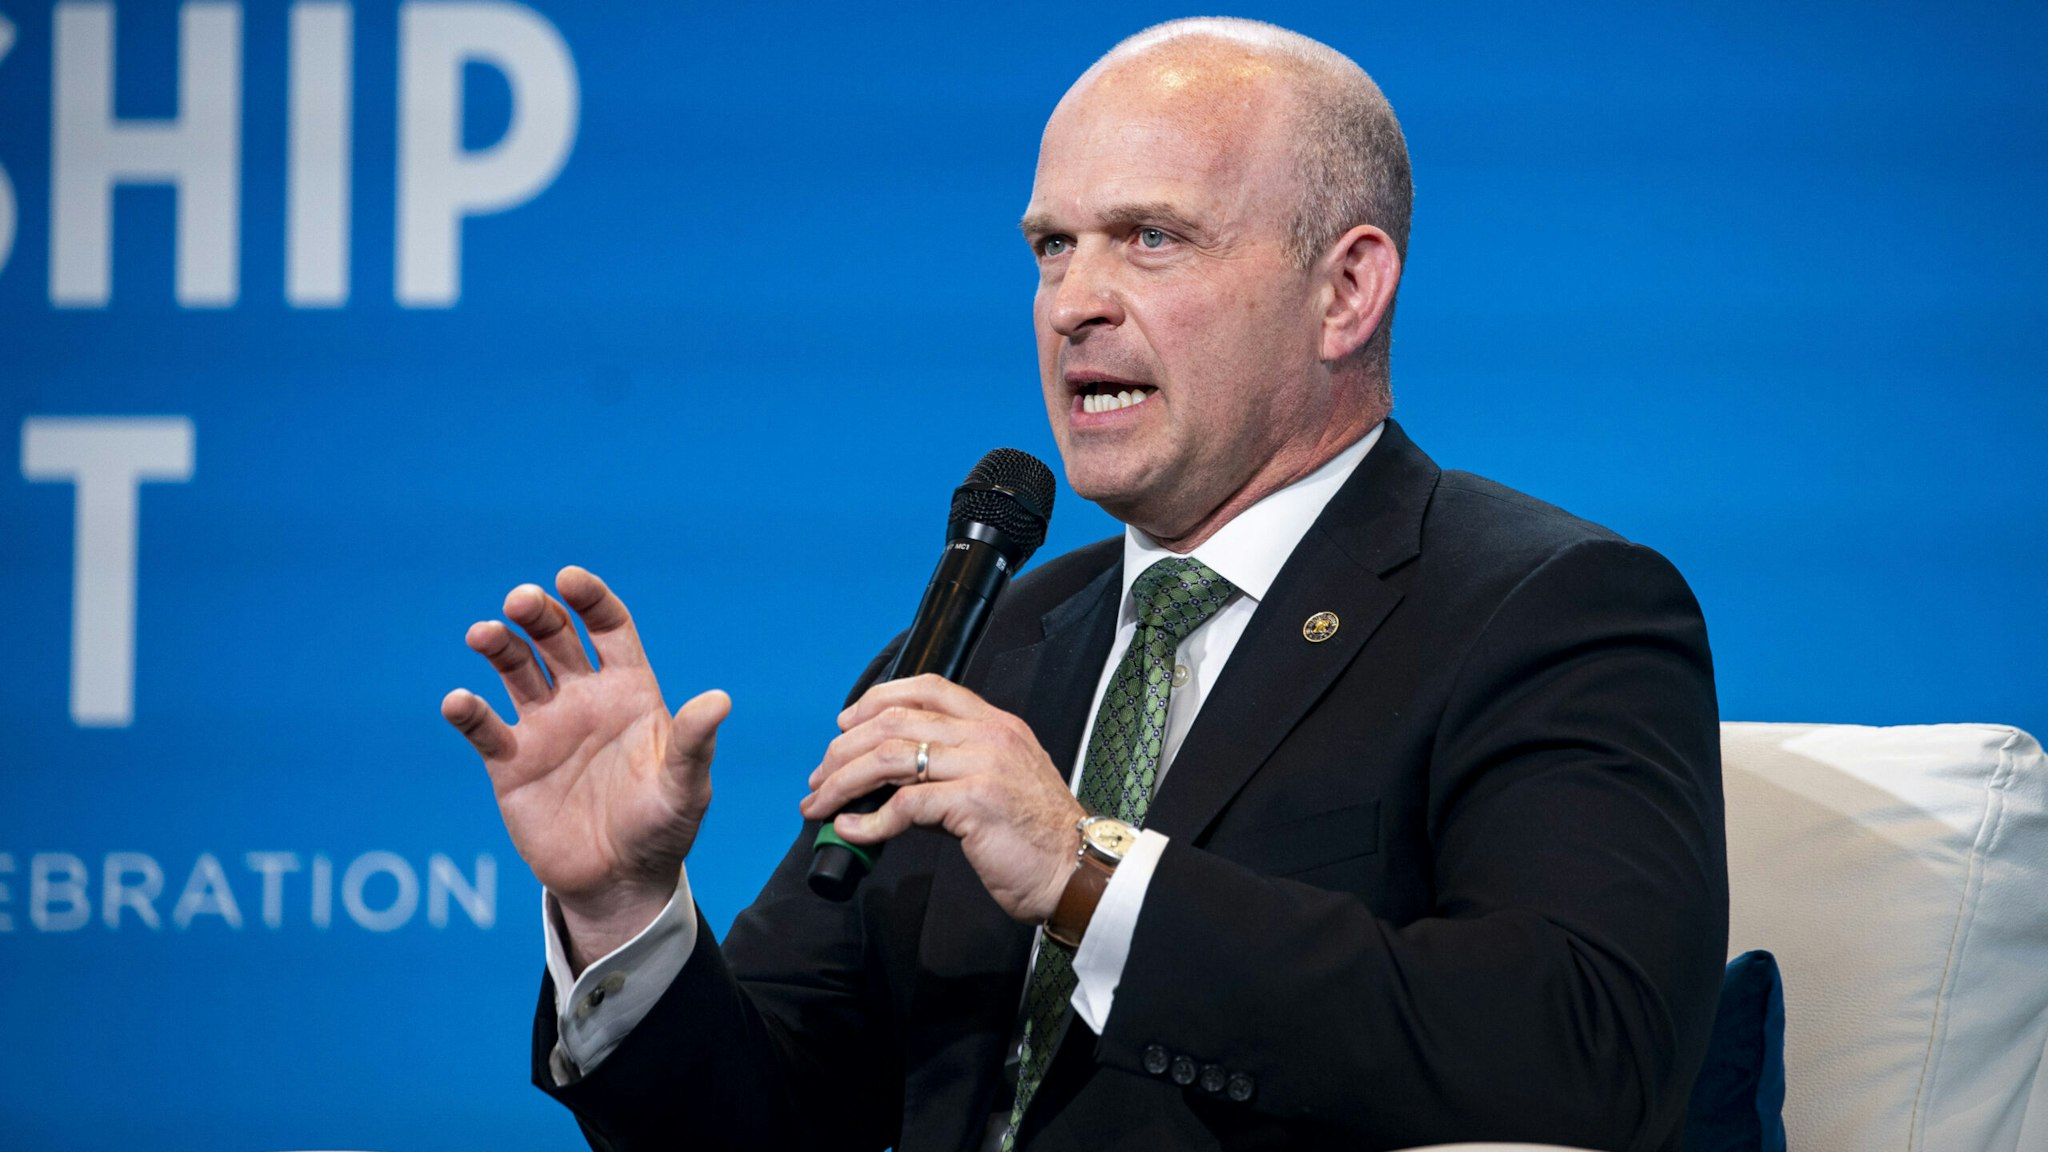 Kevin Roberts, president of The Heritage Foundation, speaks during the Heritage Foundation's Leadership Summit in National Harbor, Maryland, US, on Friday, April 21, 2023. DeSantis will visit Japan next week as he tests the international waters ahead of a possible decision to seek the Republican nomination for US president.